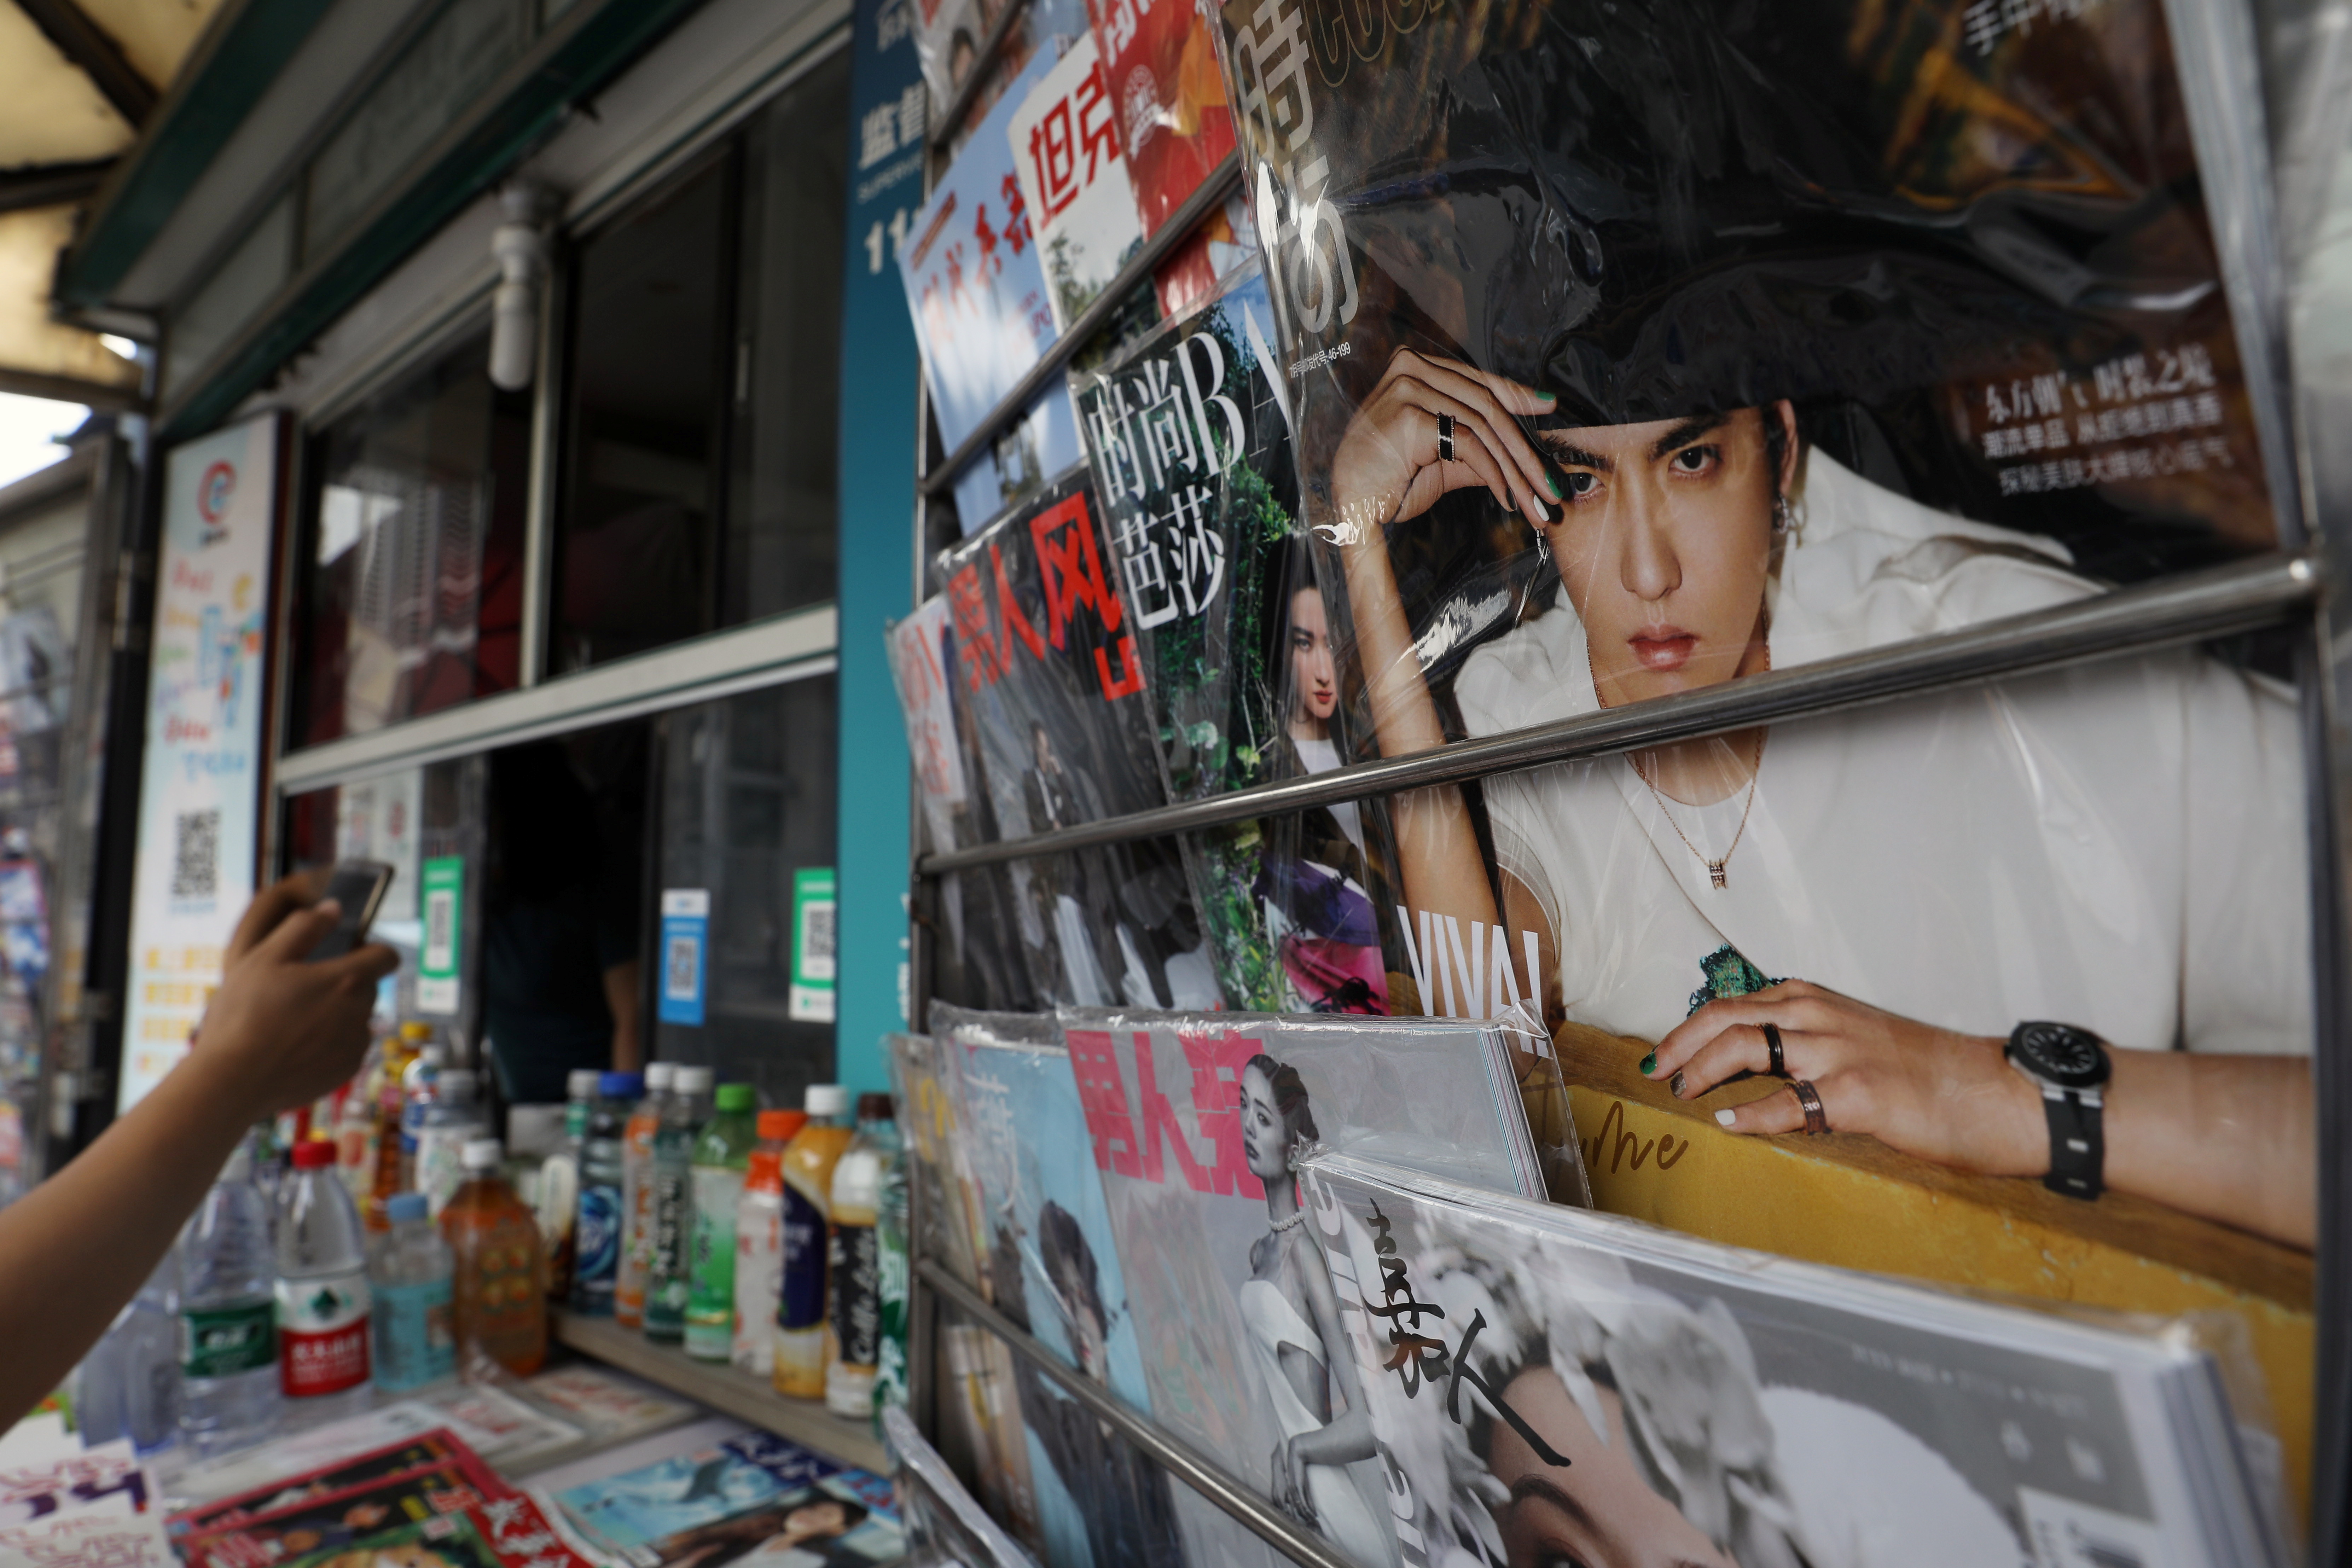 Singer-actor Kris Wu is seen on the cover of a fashion magazine at a newsstand in Beijin